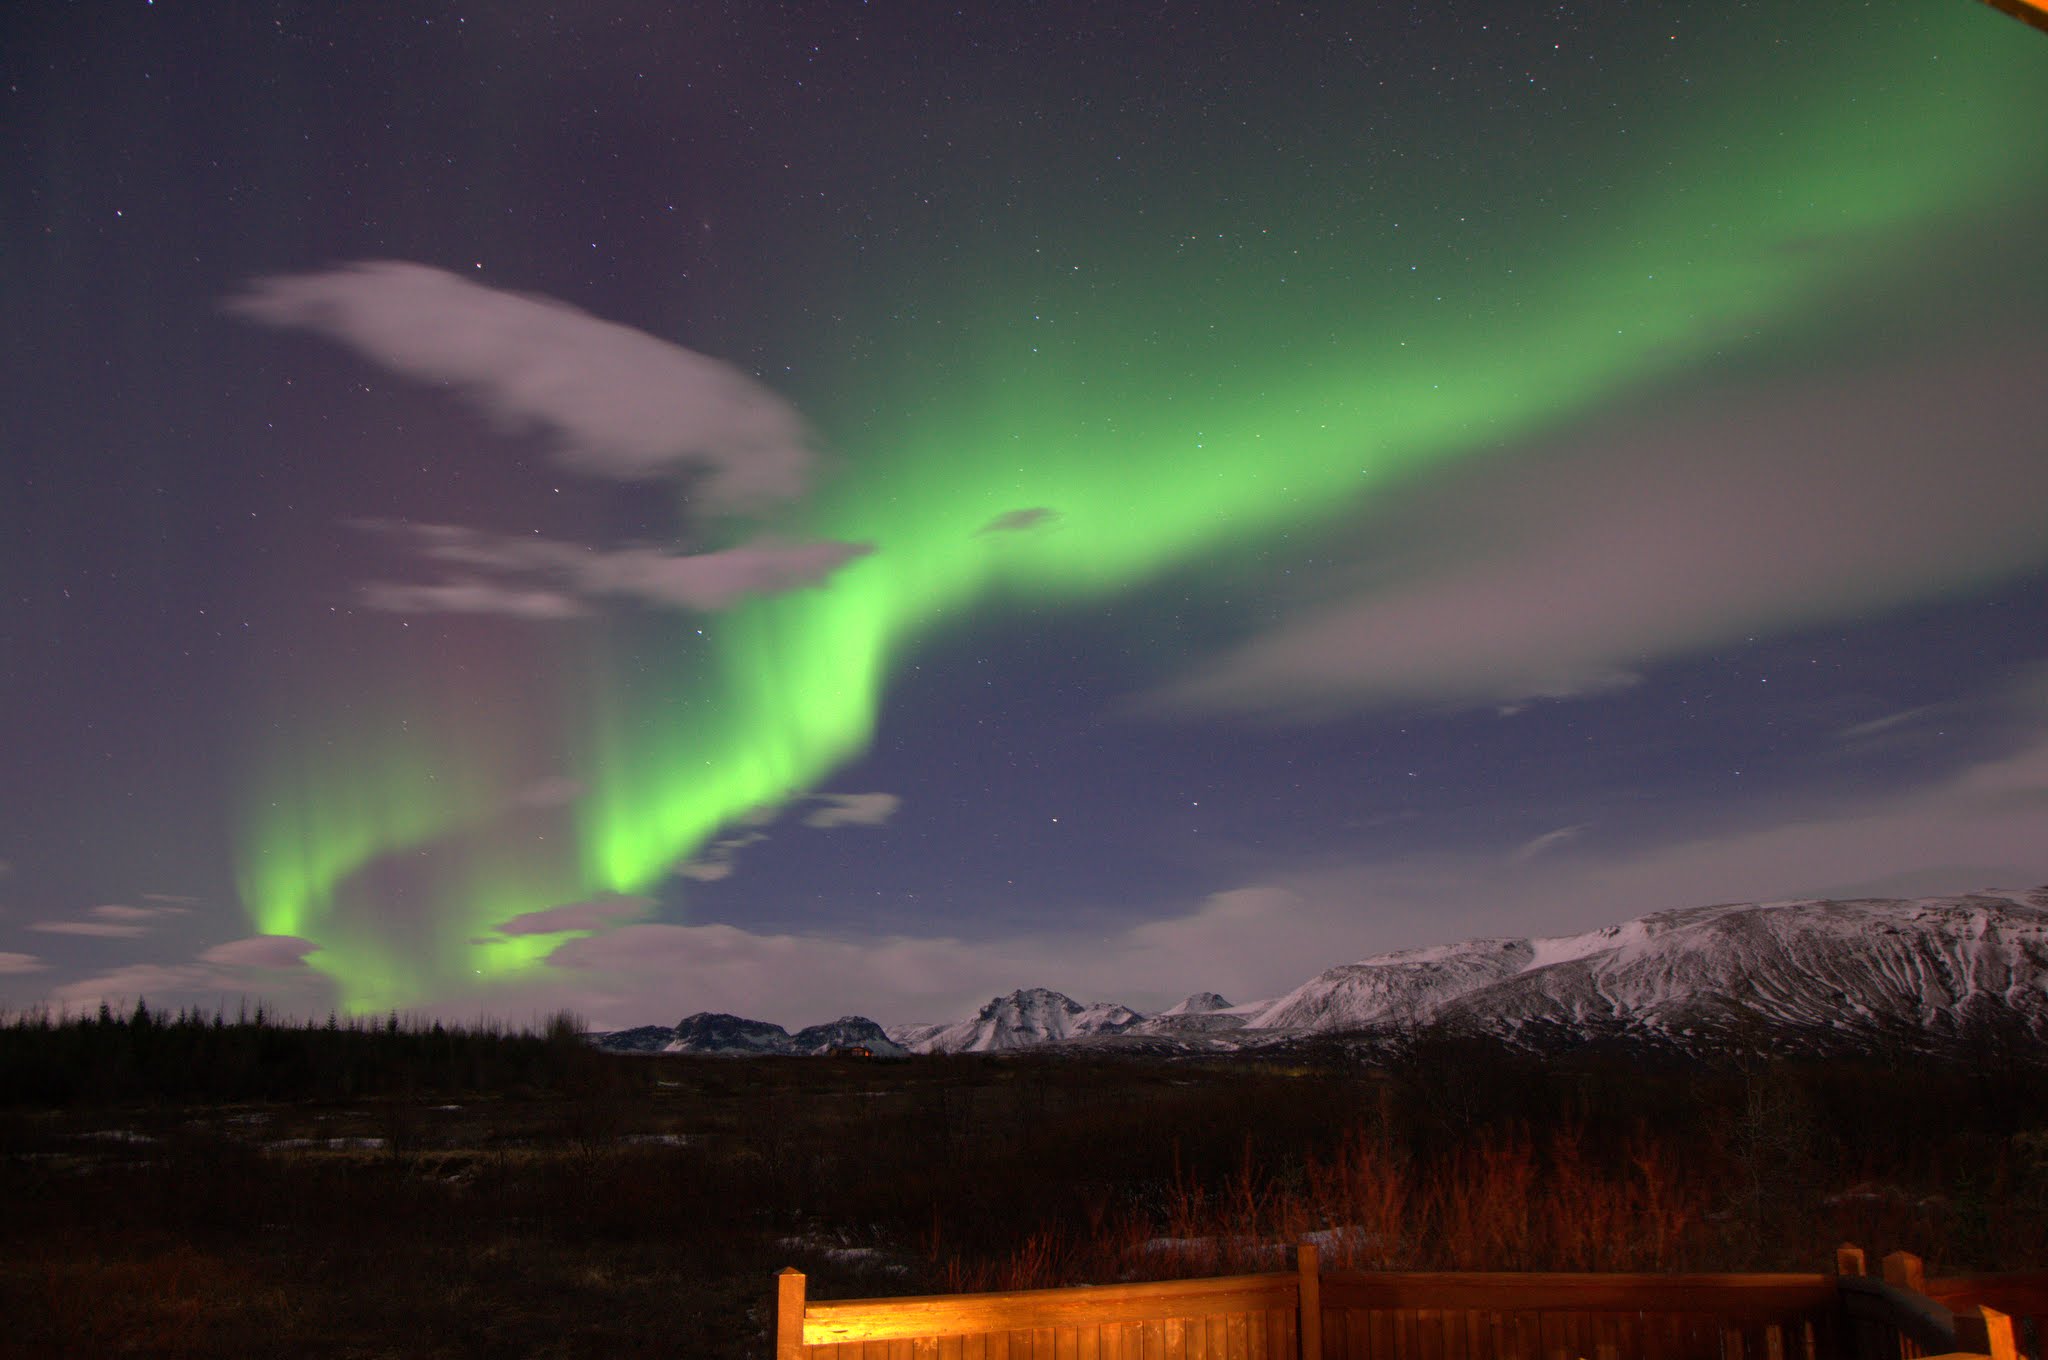 Where is the best place to see the northern lights?